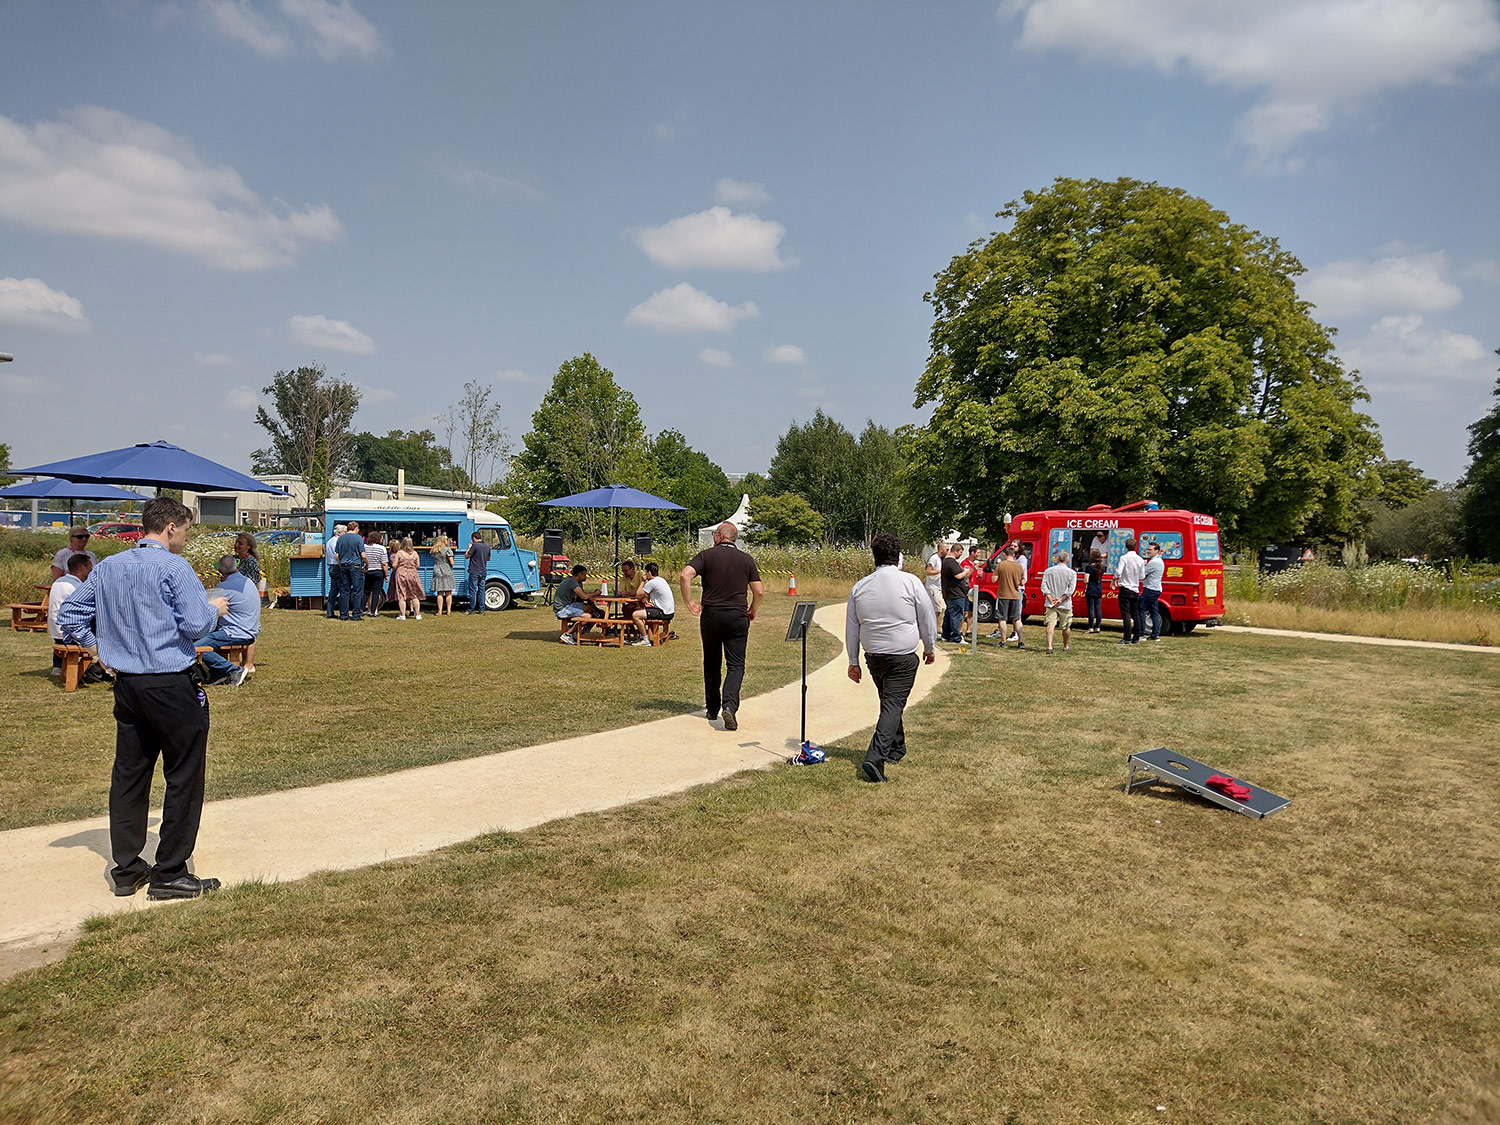 Melbourn Science Park's Summer BBQ hosted by Bruntwood SciTech in 2022